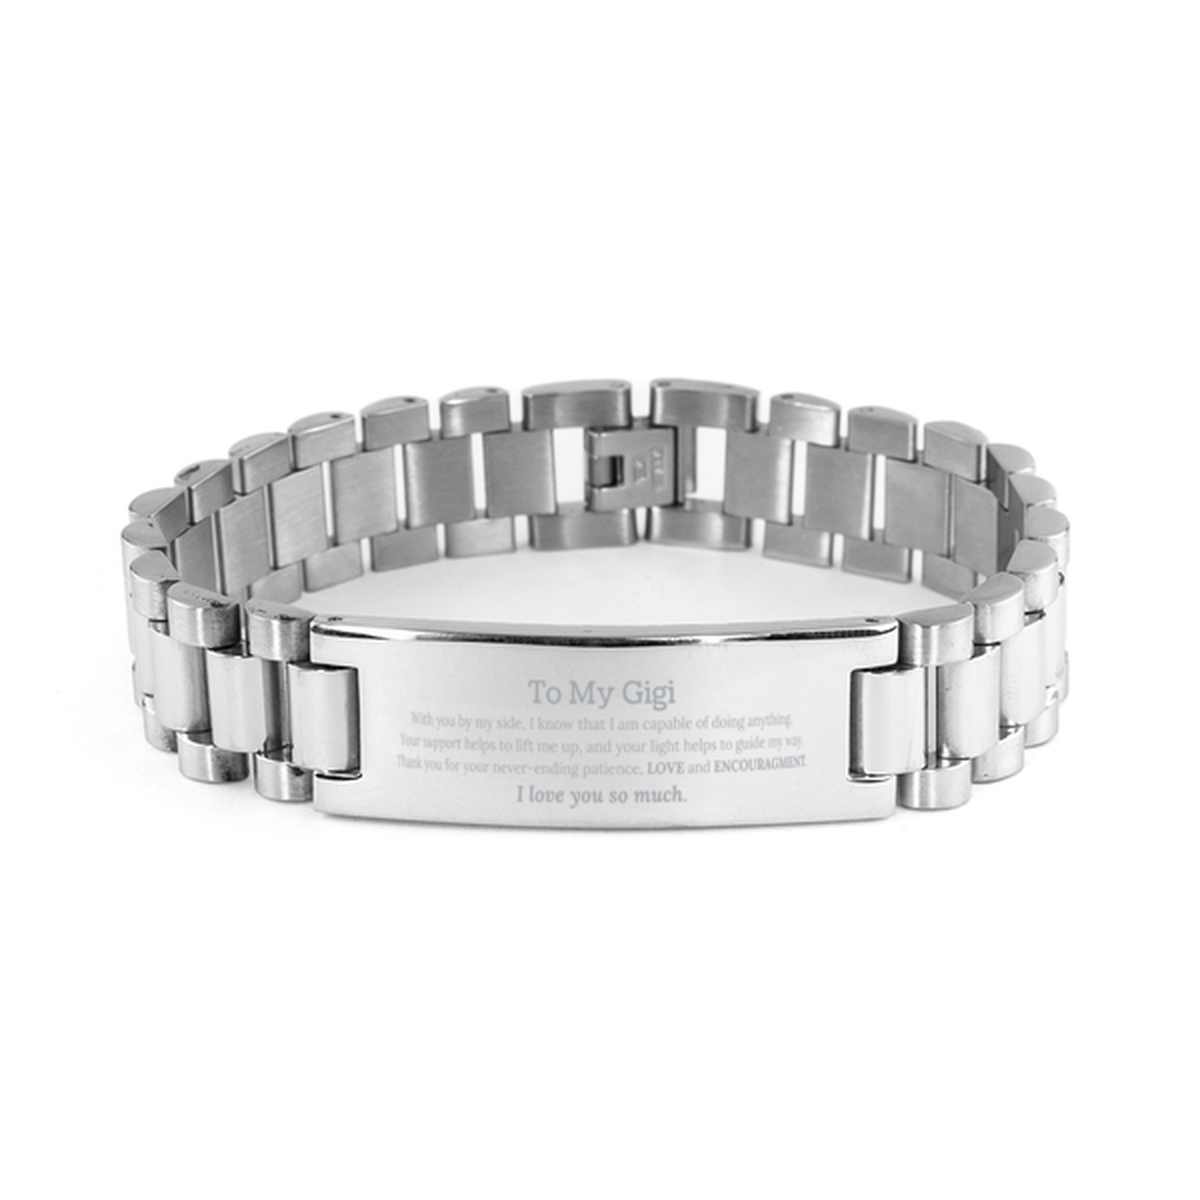 Appreciation Gigi Ladder Stainless Steel Bracelet Gifts, To My Gigi Birthday Christmas Wedding Keepsake Gifts for Gigi With you by my side, I know that I am capable of doing anything. I love you so much